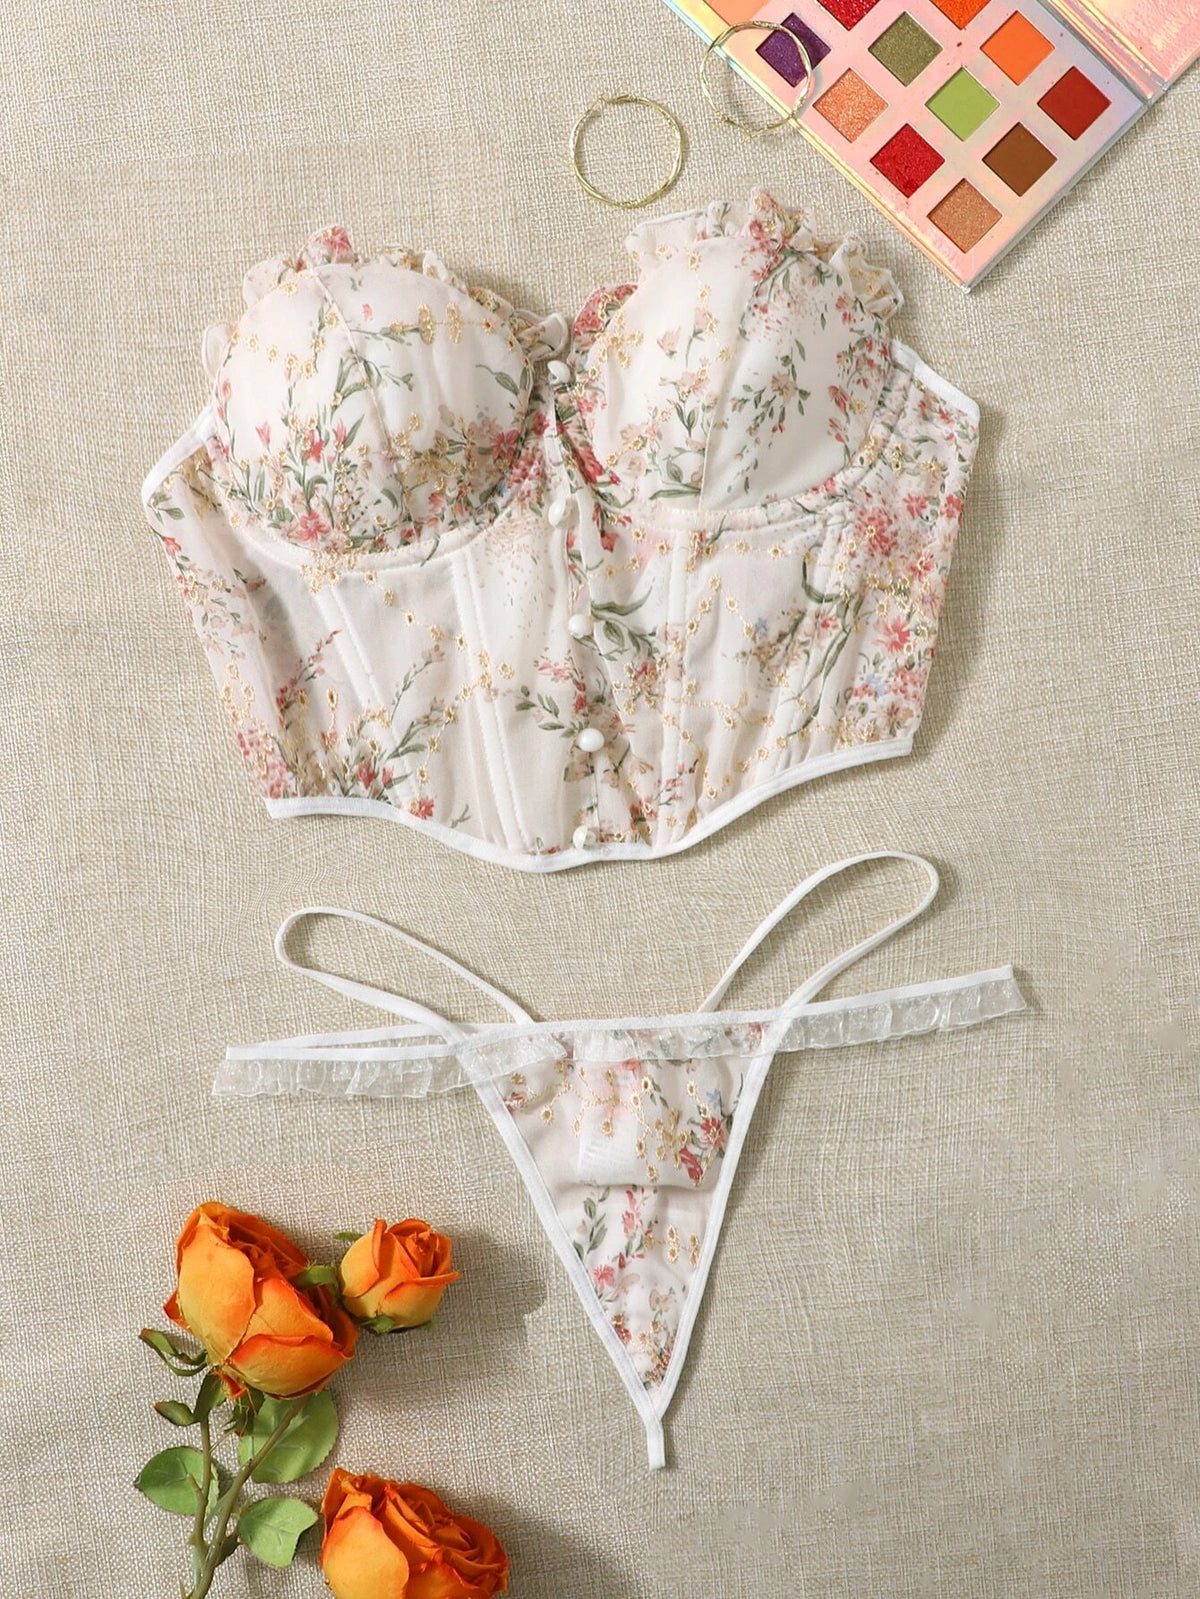 Floral Embroidered Frilled Fake Button Tube Underwire Lingerie Set